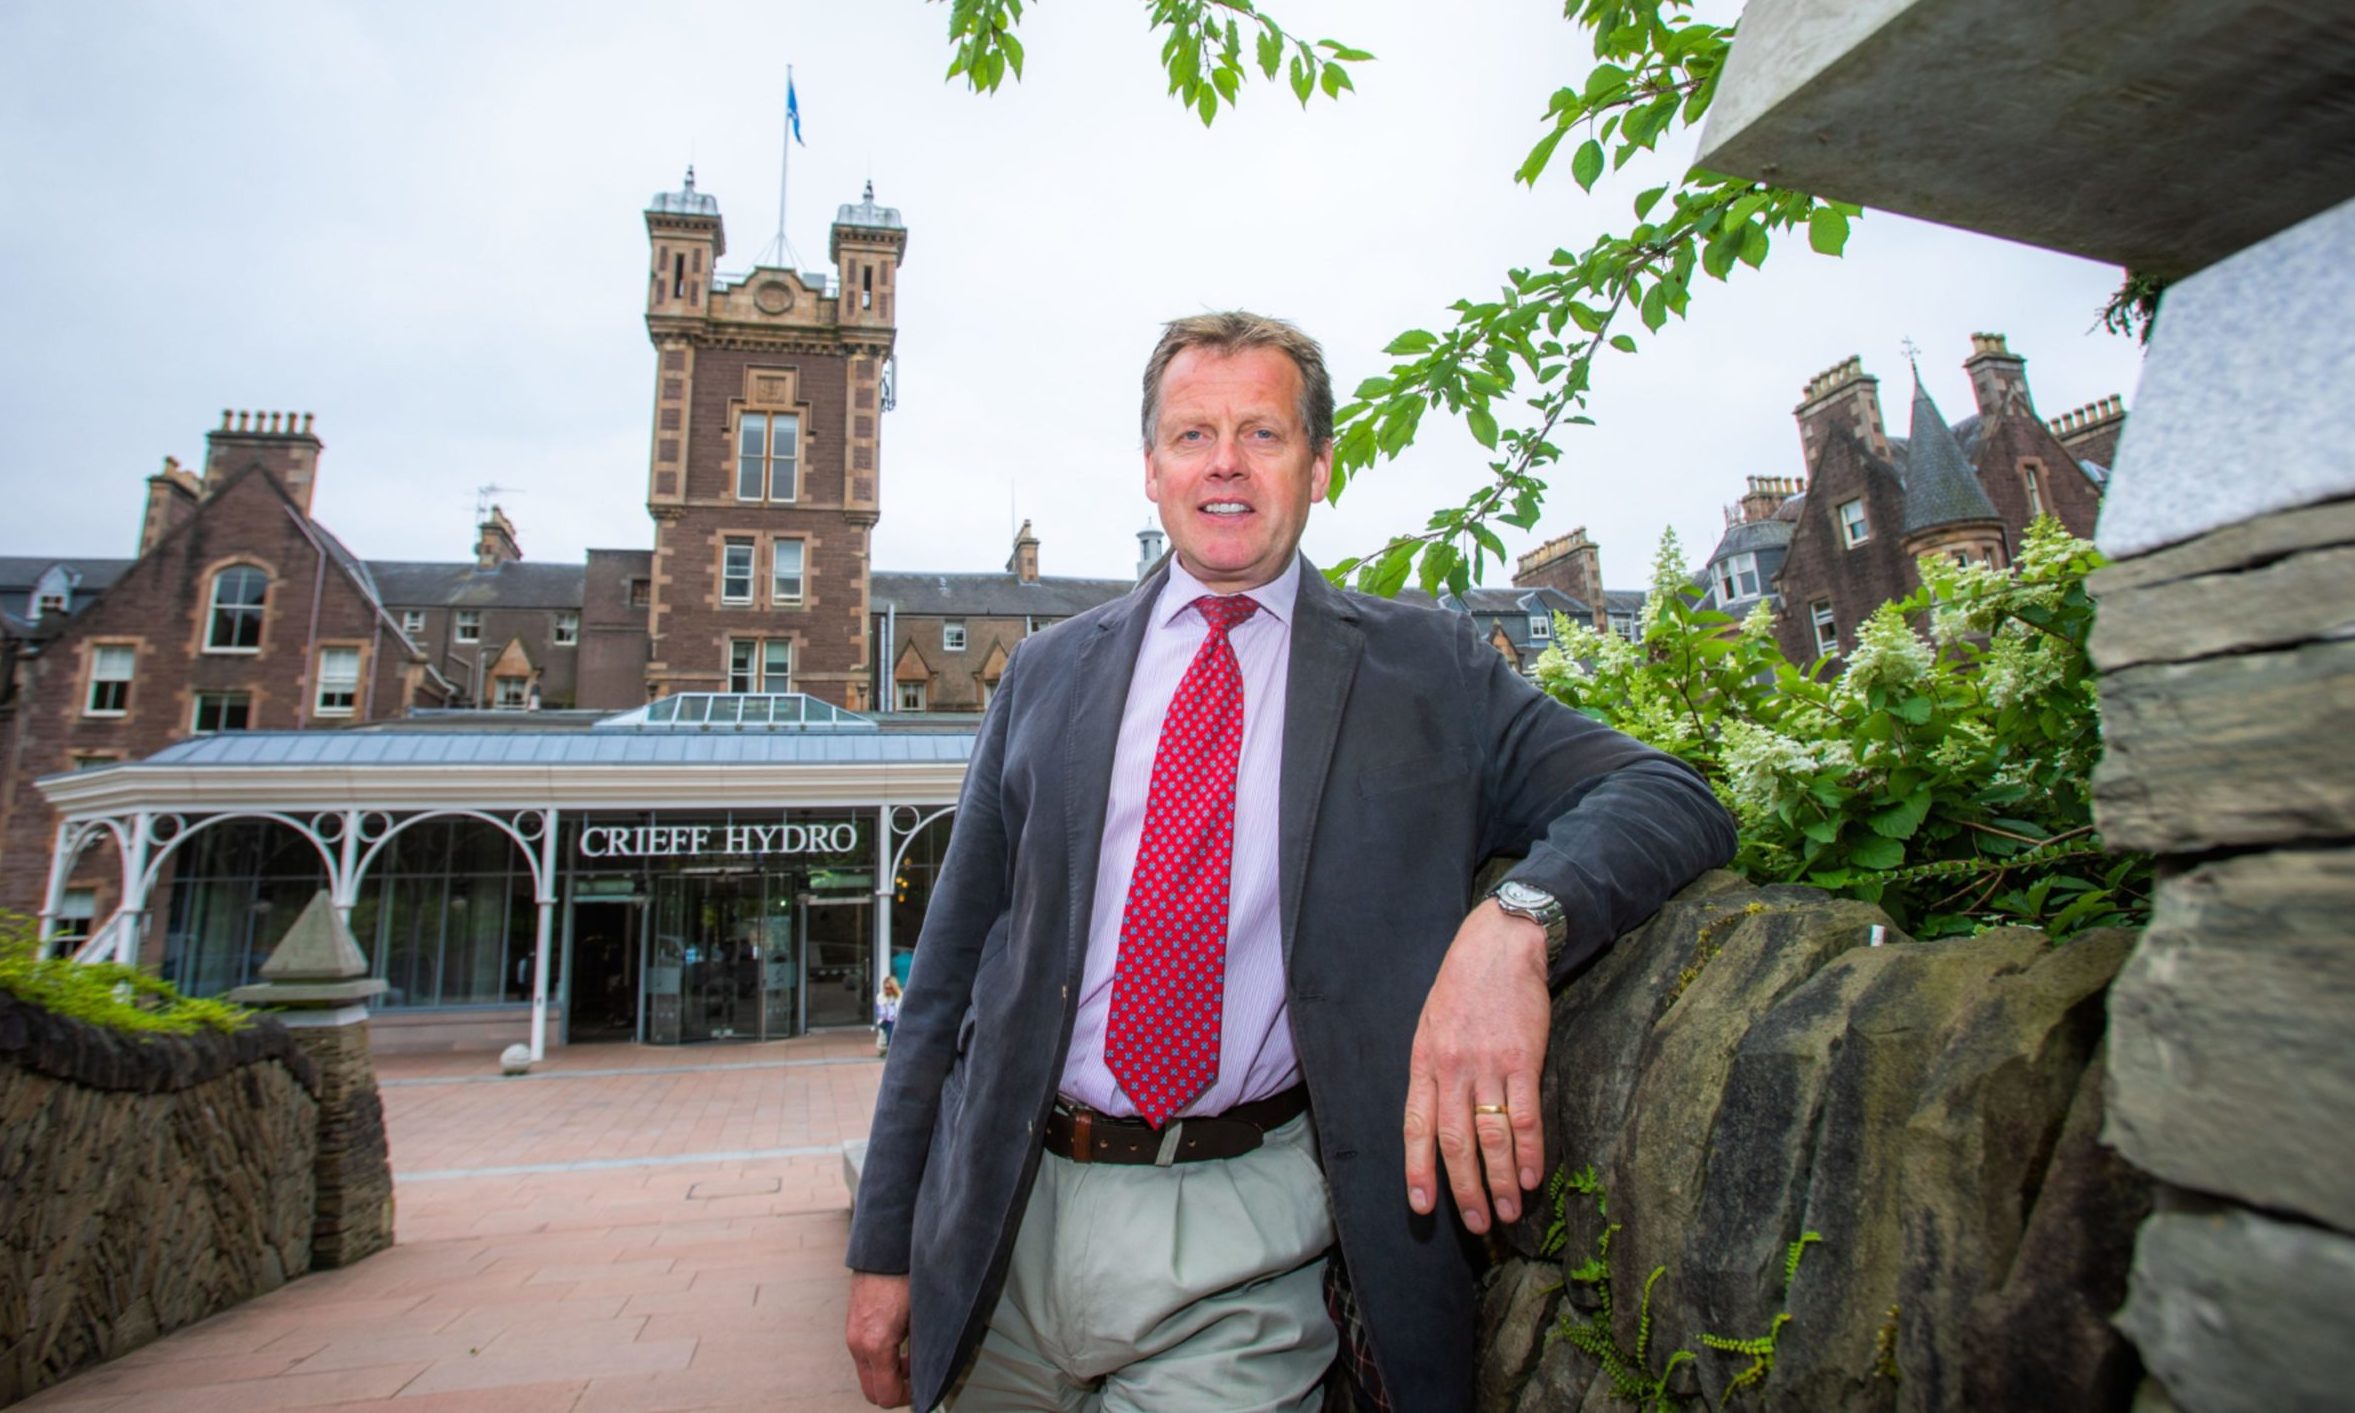 Stephen Leckie, CEO of Crieff Hydro